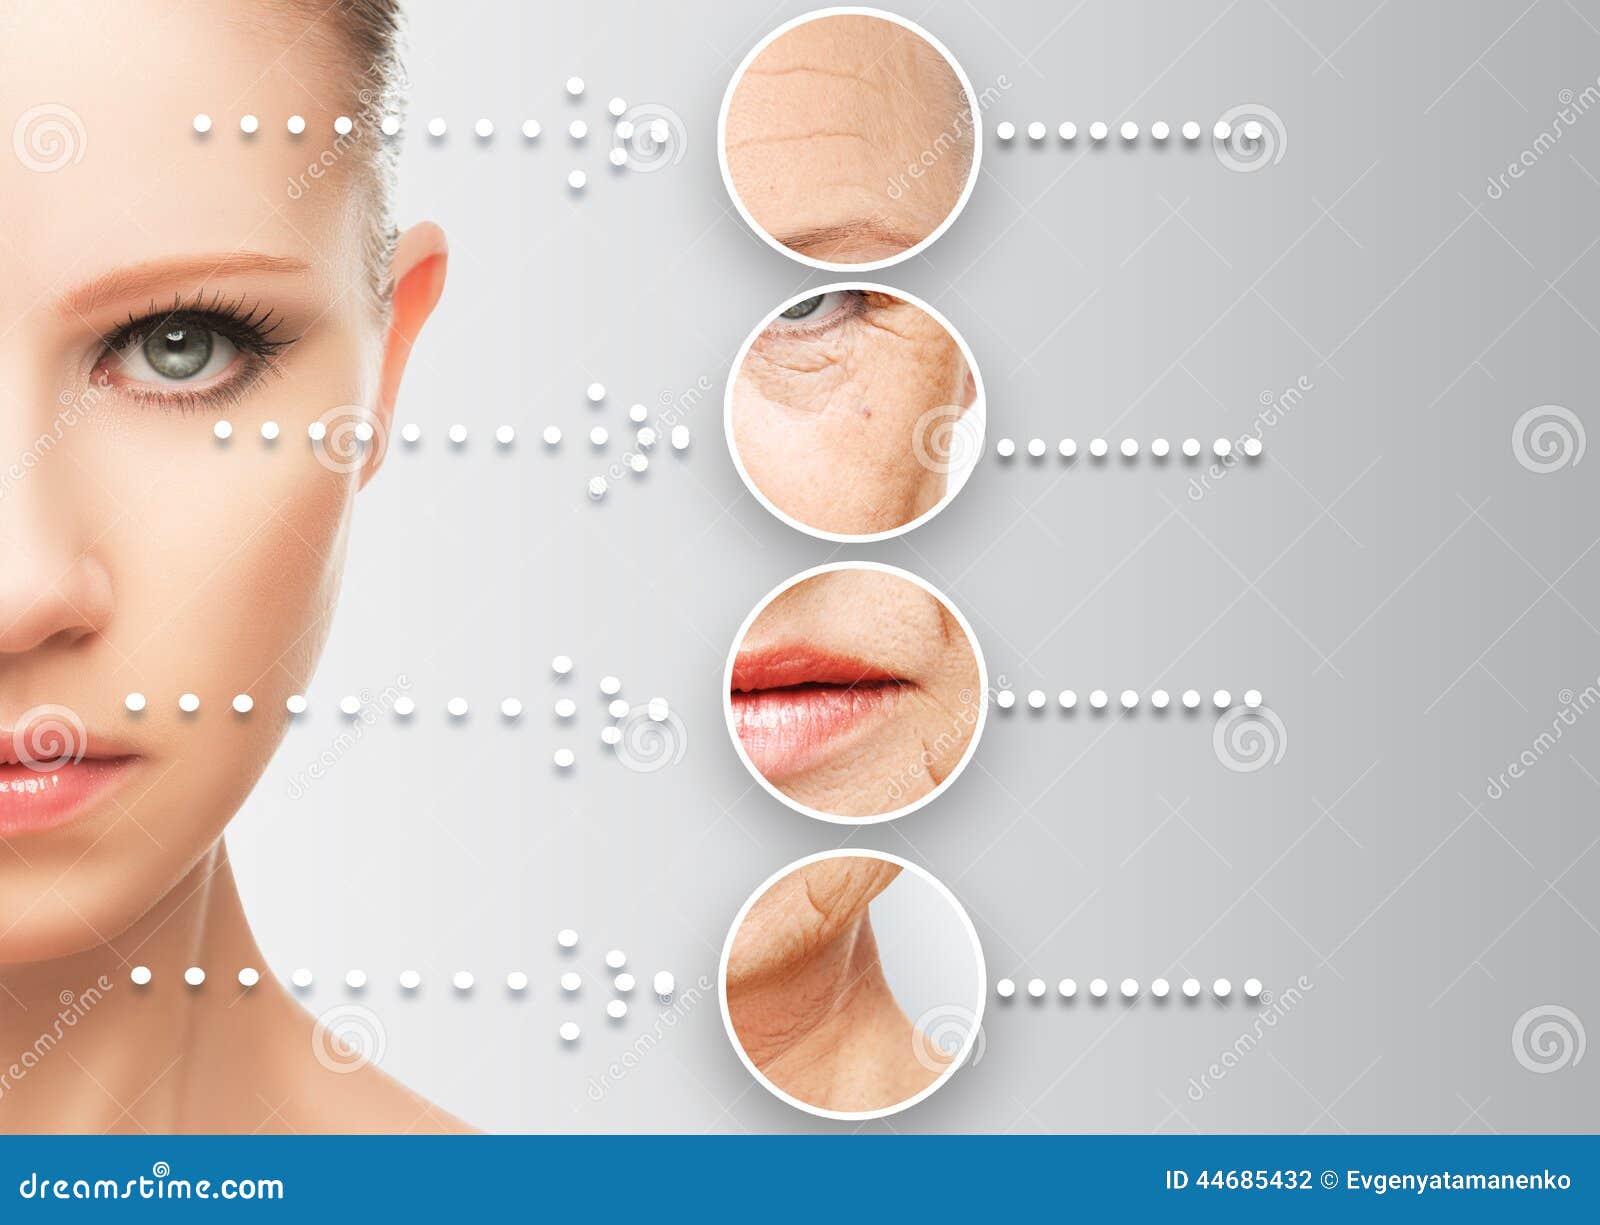 beauty concept skin aging. anti-aging procedures